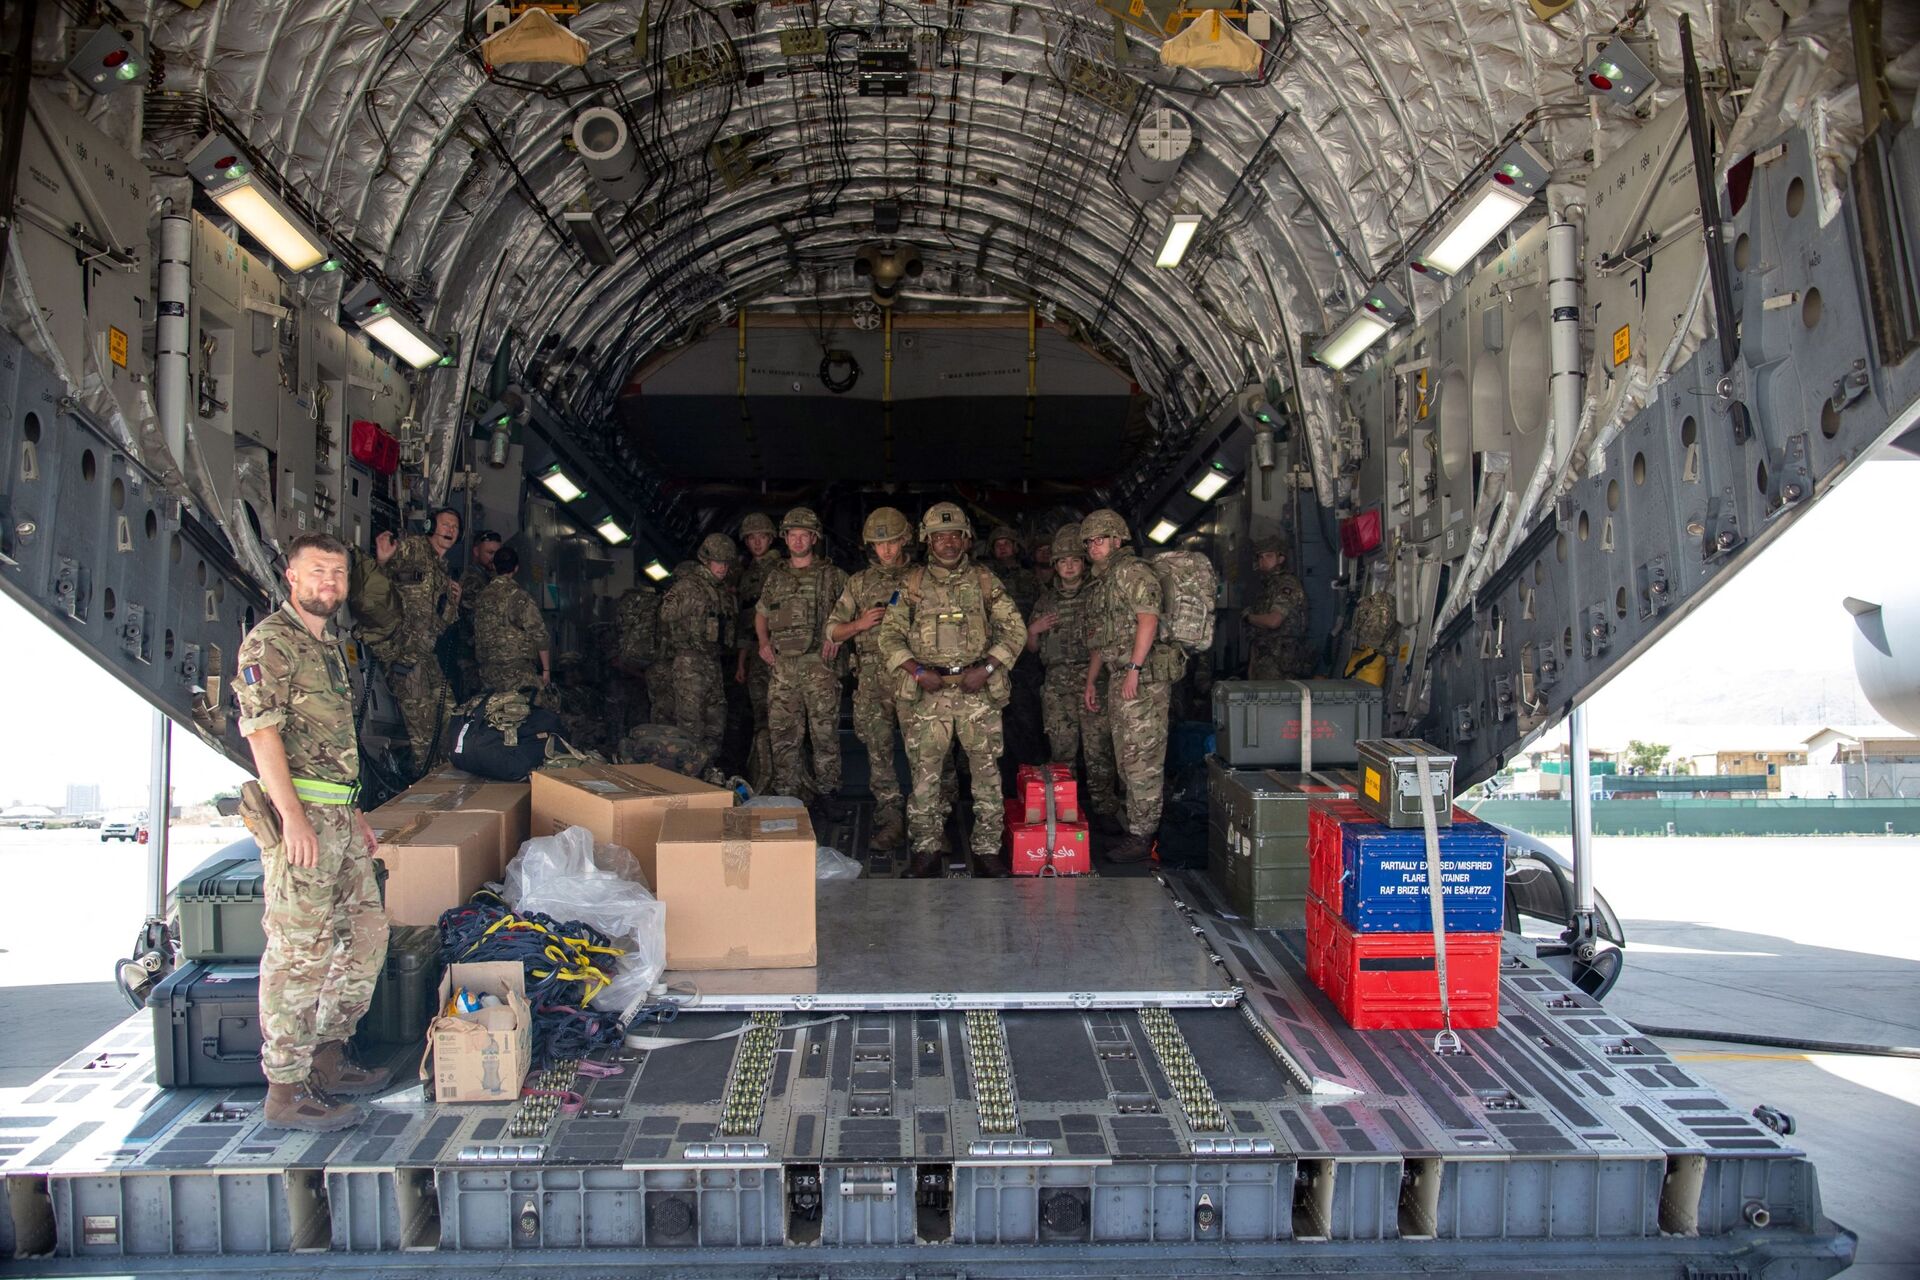 A handout picture taken and released by the British Ministry of Defence (MOD) on August 15, 2021 shows members of the British Army, from 16 Air Assault Brigade, as they disembark from an RAF Voyager aircraft after landing in Kabul, Afghanistan, to assist in evacuating British nationals and entitled persons as part of Operation PITTING - Sputnik International, 1920, 07.09.2021